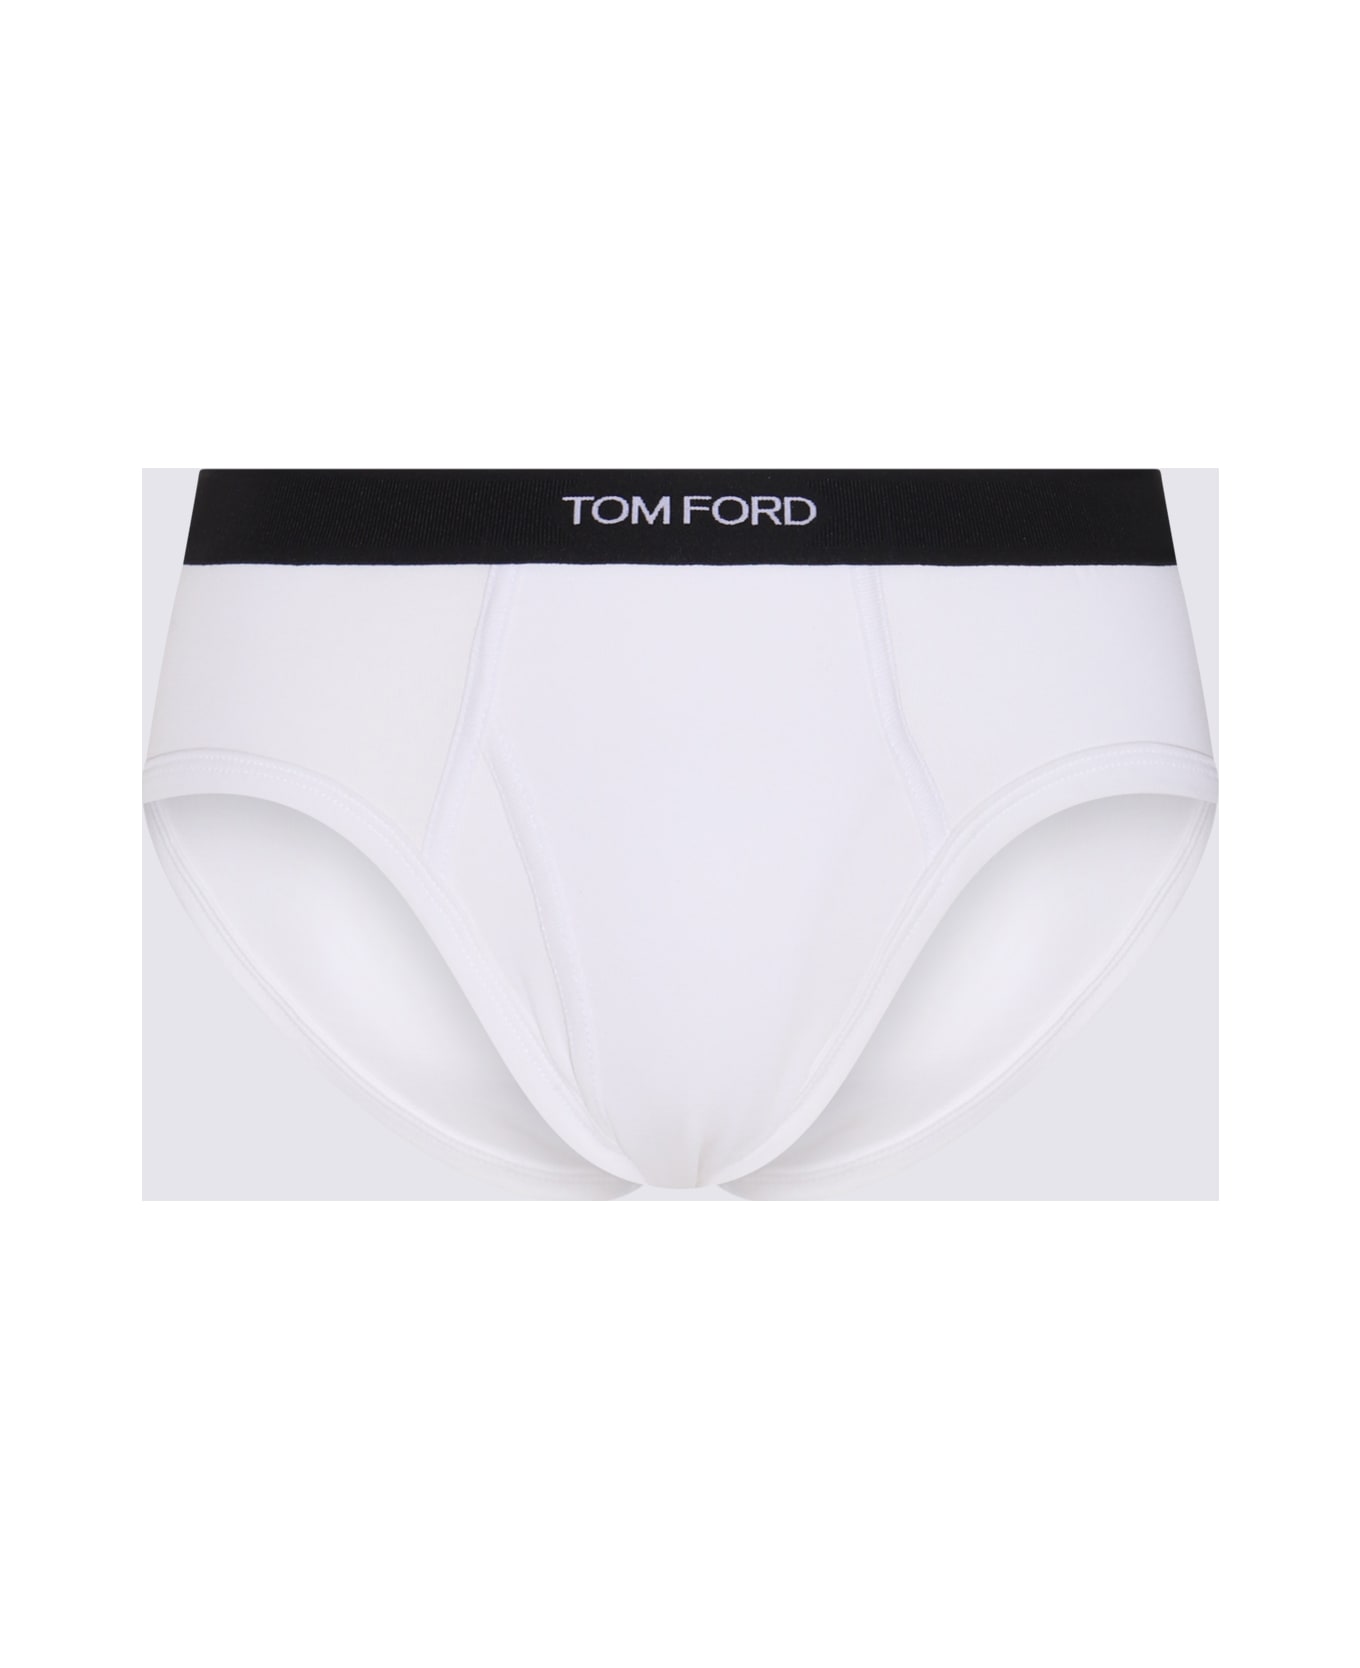 Tom Ford Black And White Cotton Two Pack Briefs - Black